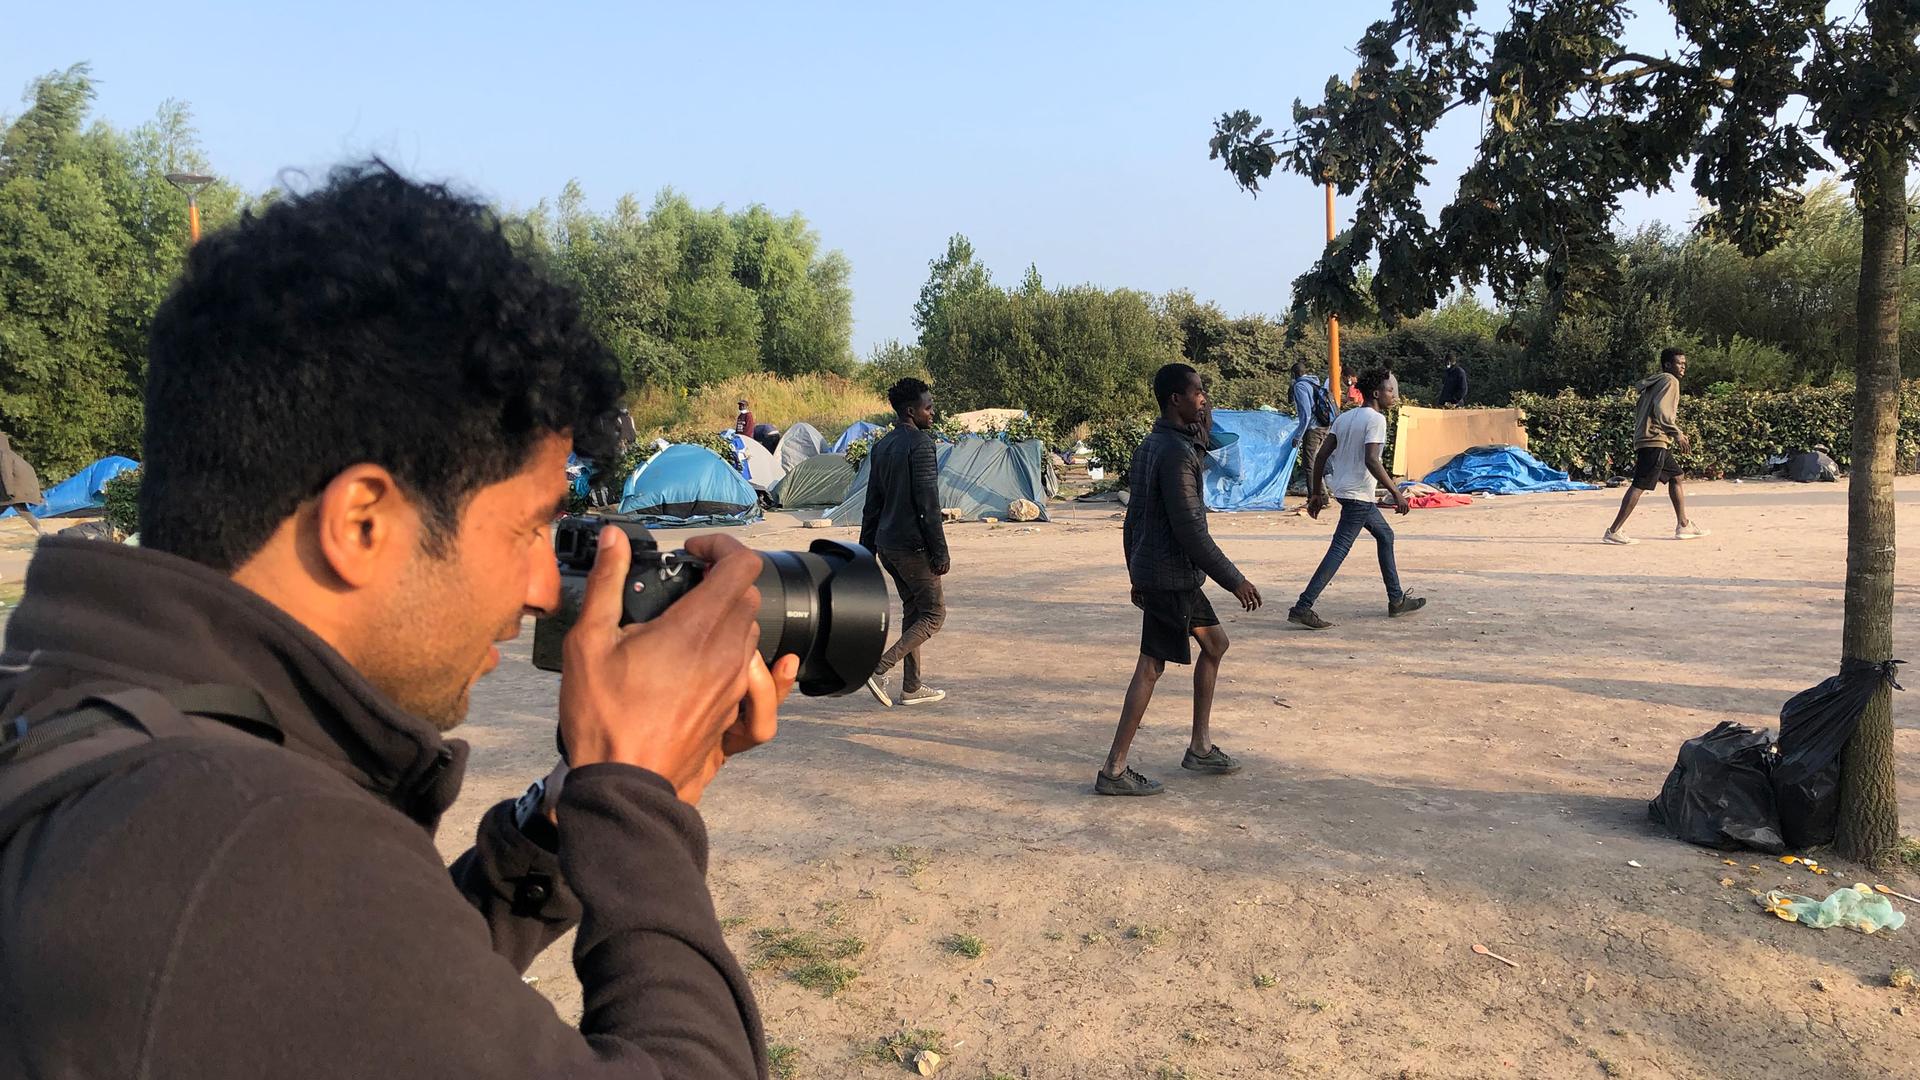 Abdul Saboor, an award-winning Afghan photographer in France, documents a soccer game at a refugee encampment in Calaís, France. 